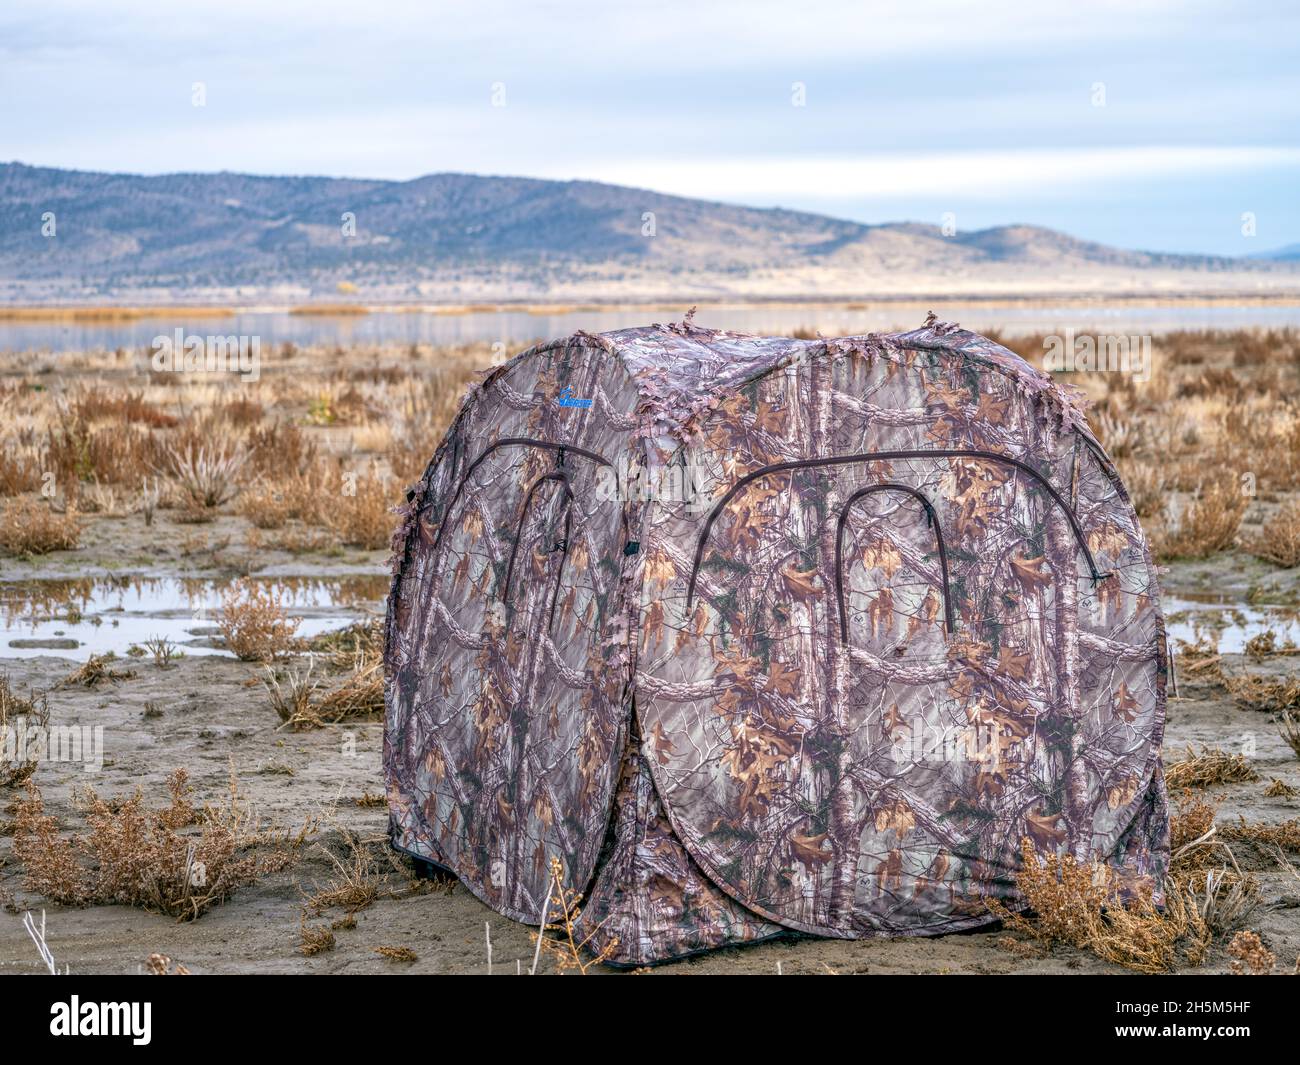 Reno, Nevada USA - November 10, 2021: Ameristep camouflage Blind or Hide used for Photography at the Swan Lake Nature preserve just north of Reno. Stock Photo